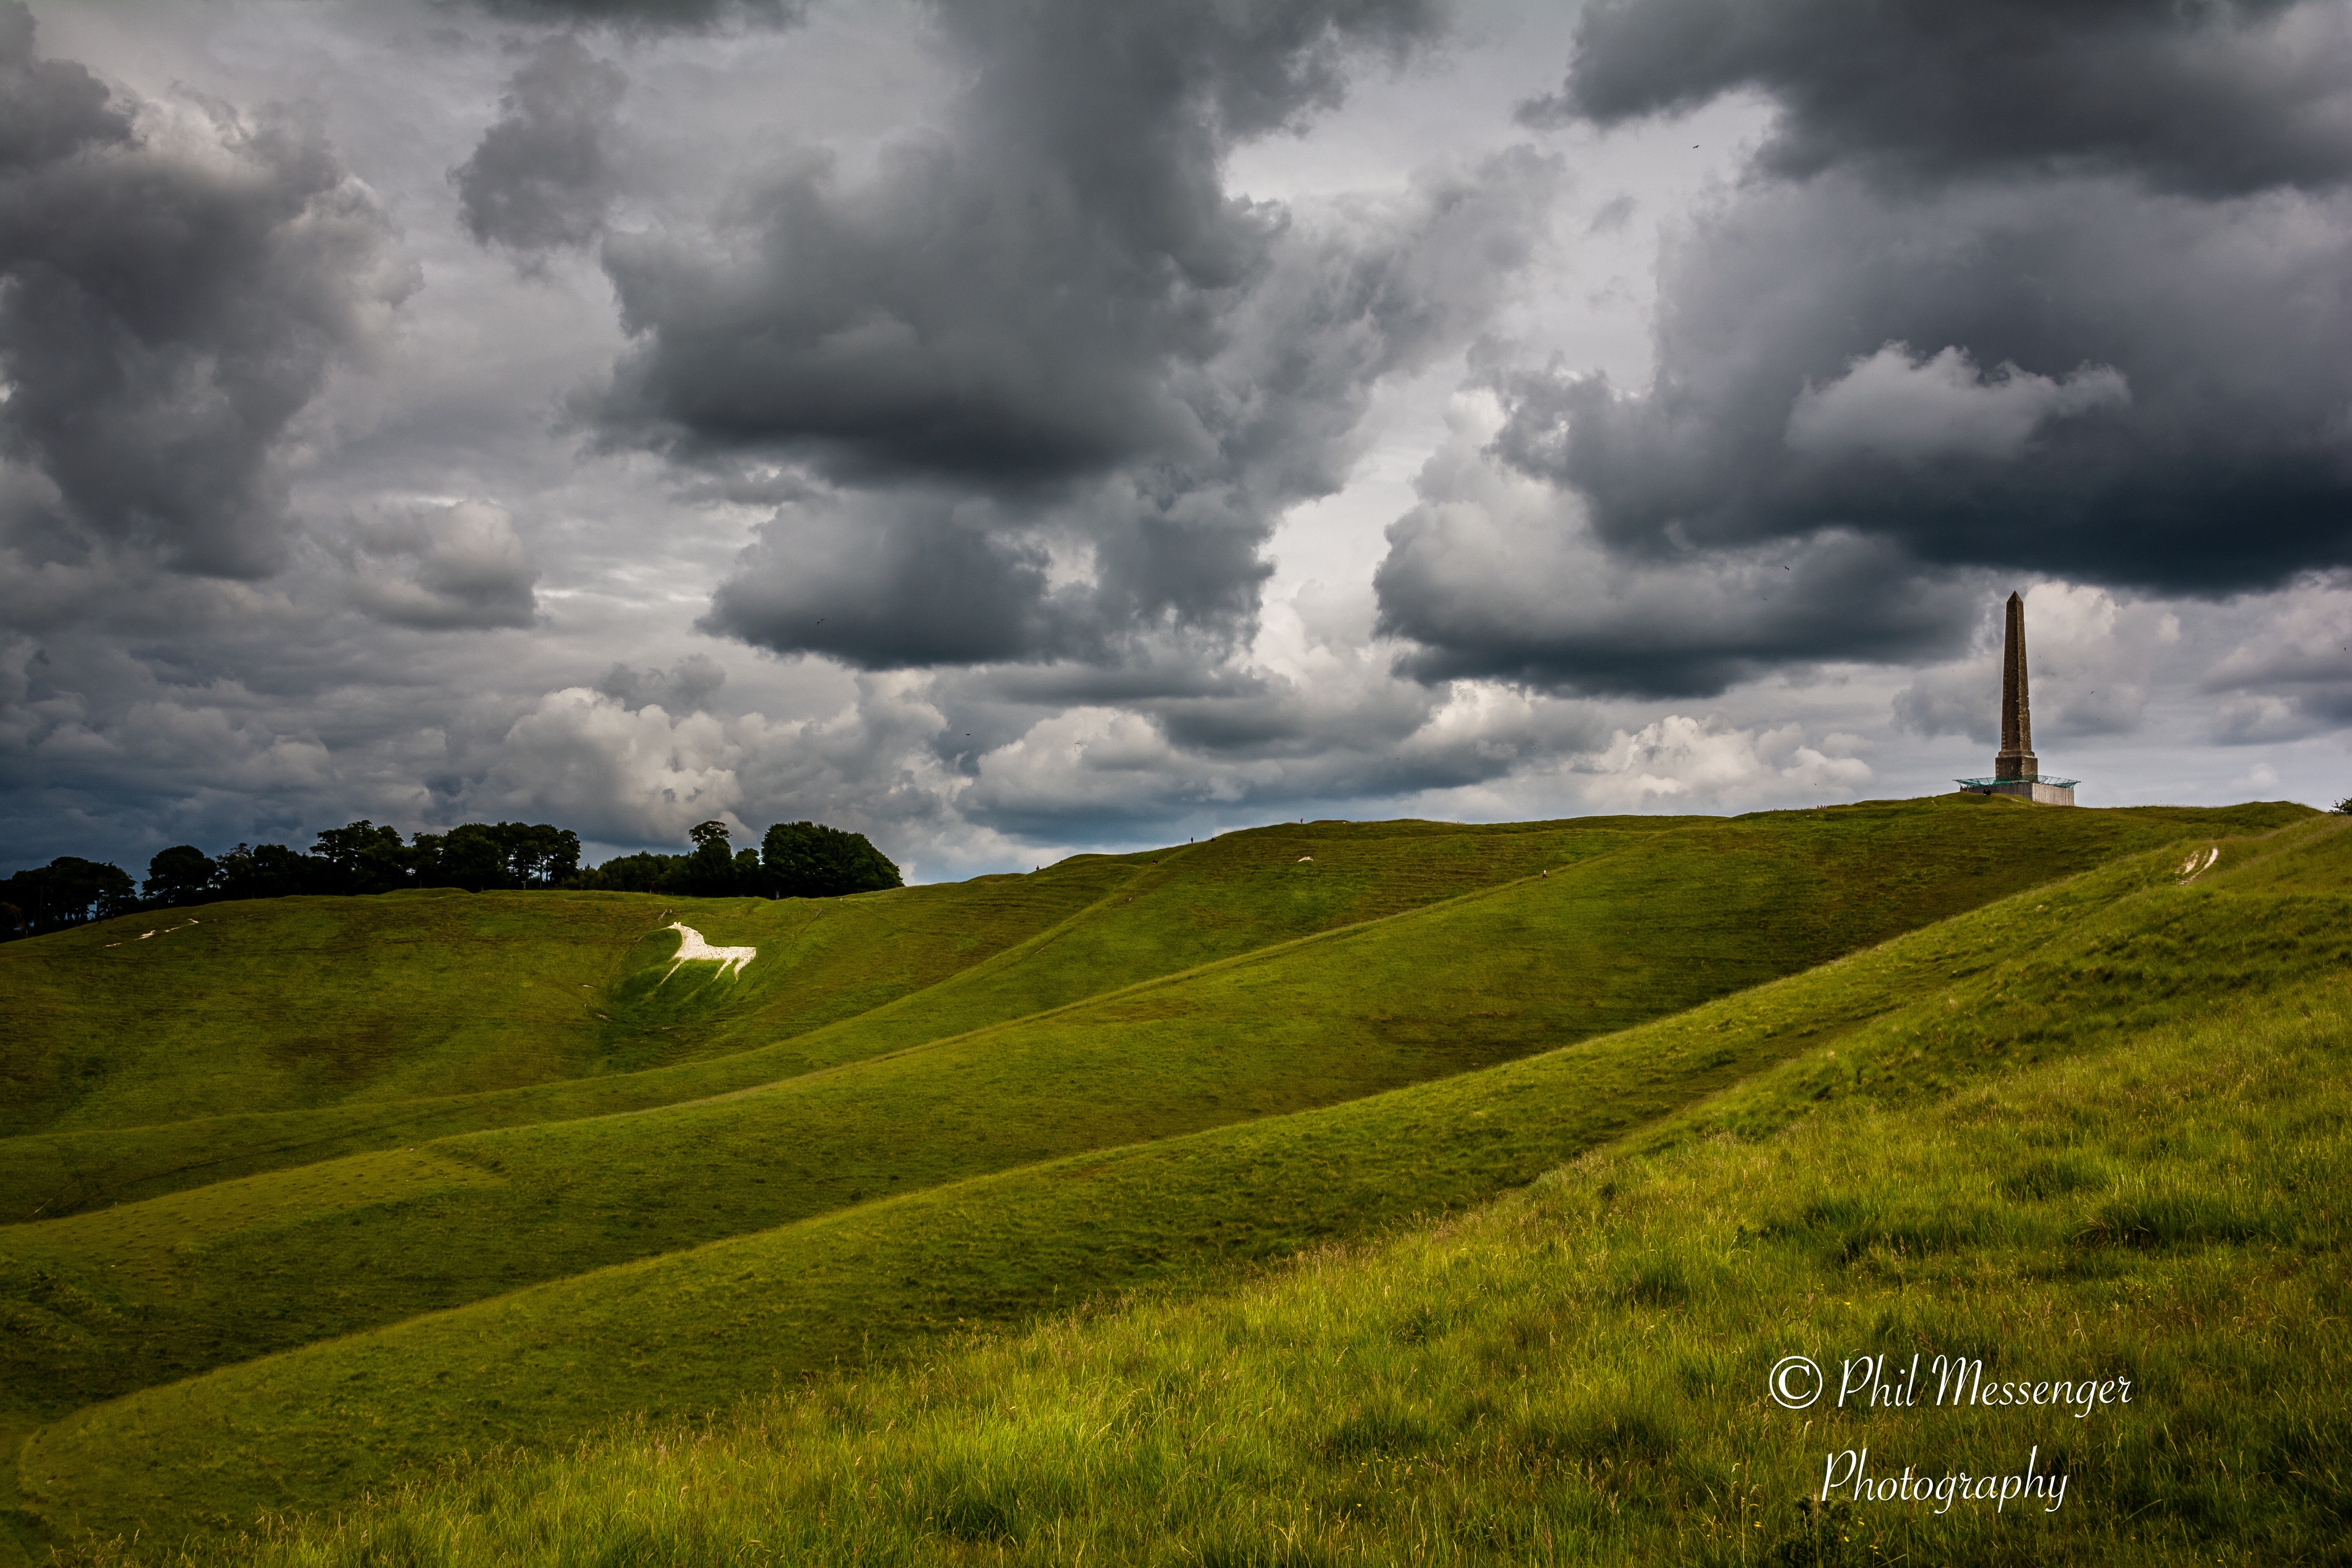 Cherhill monument and white horse in Wiltshire, England under cloudy skies.